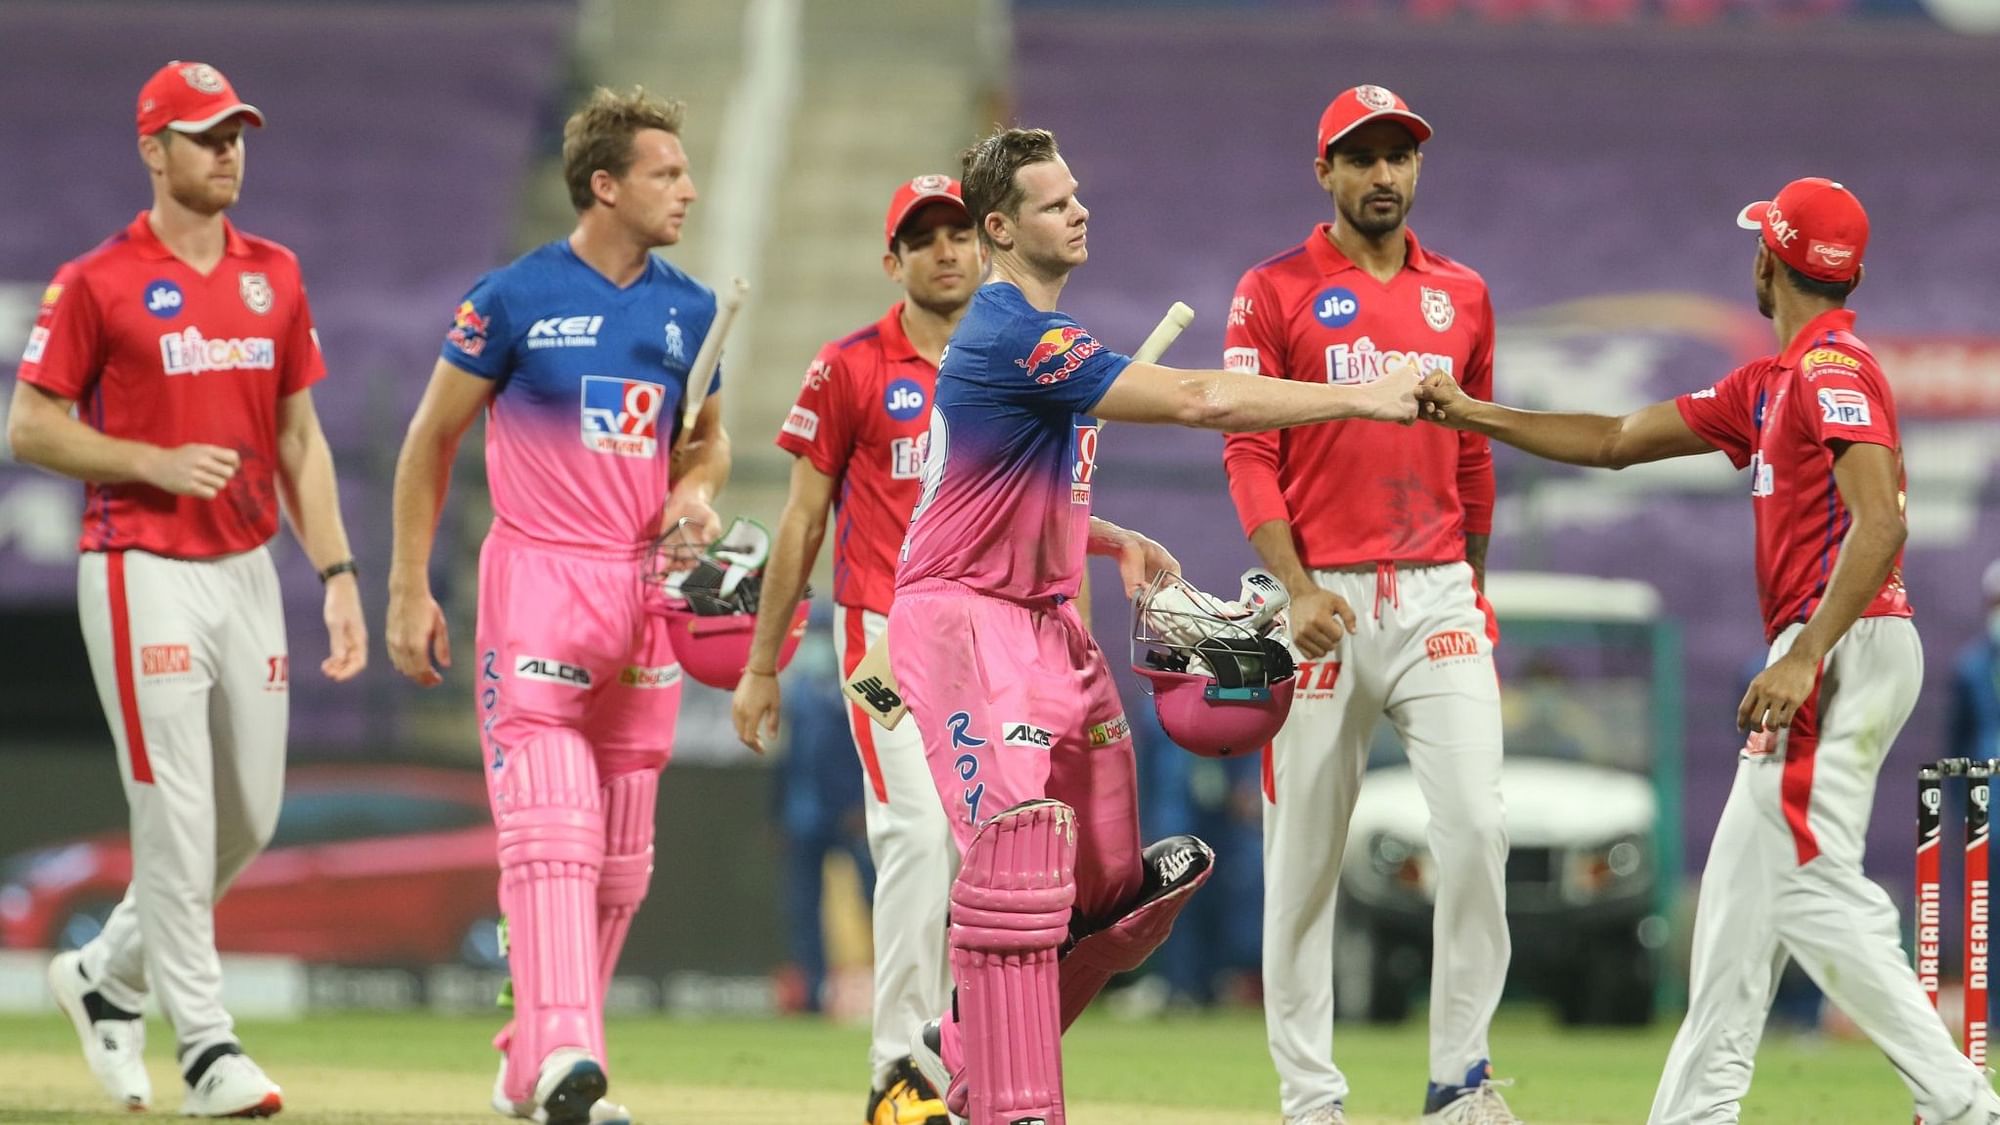 Rajasthan Royals defeated Kings XI Punjab by 7 wickets.